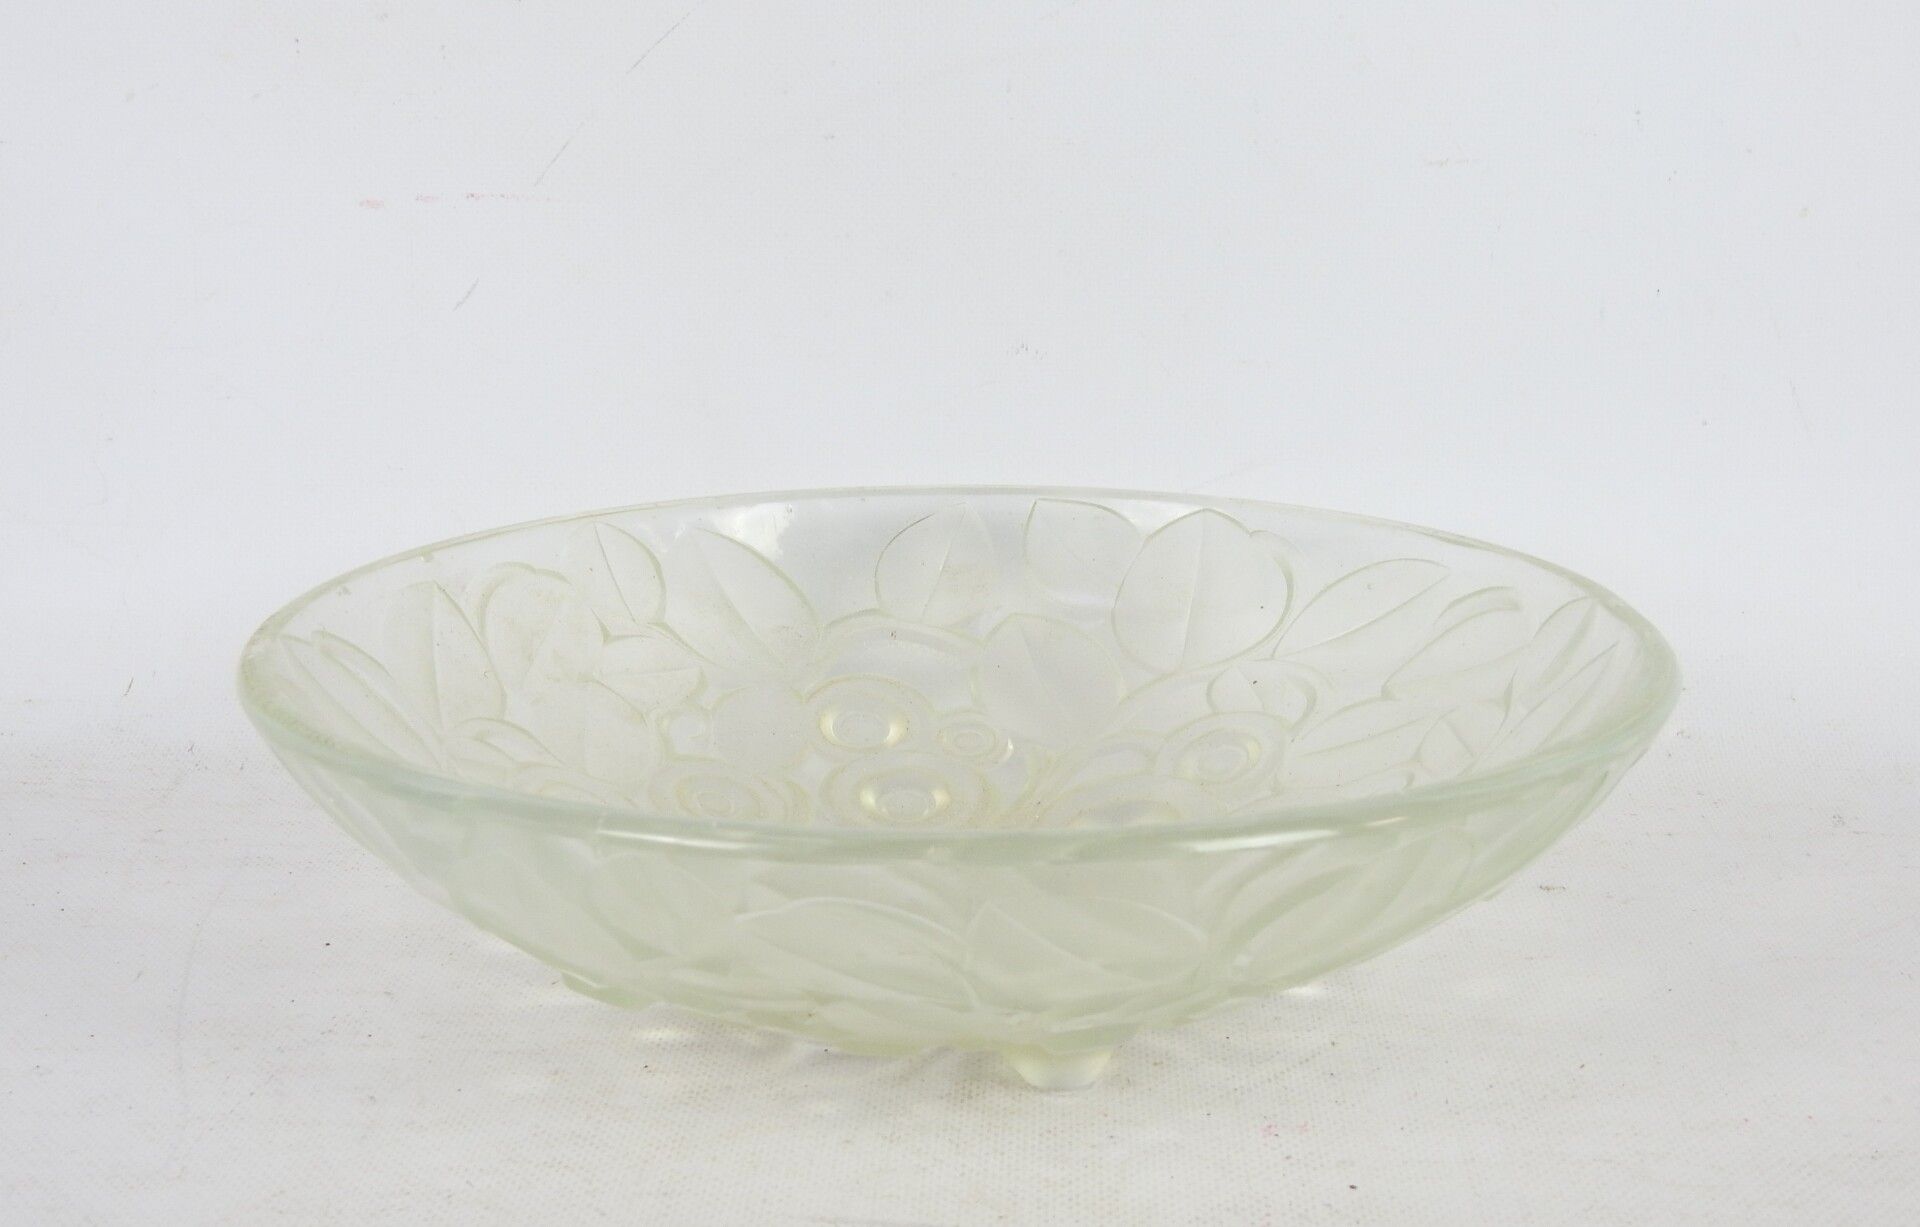 Null HUNEBELLE & COGNEVILLE: Pressed glass bowl of Art Deco style. 8 x 29 cm.